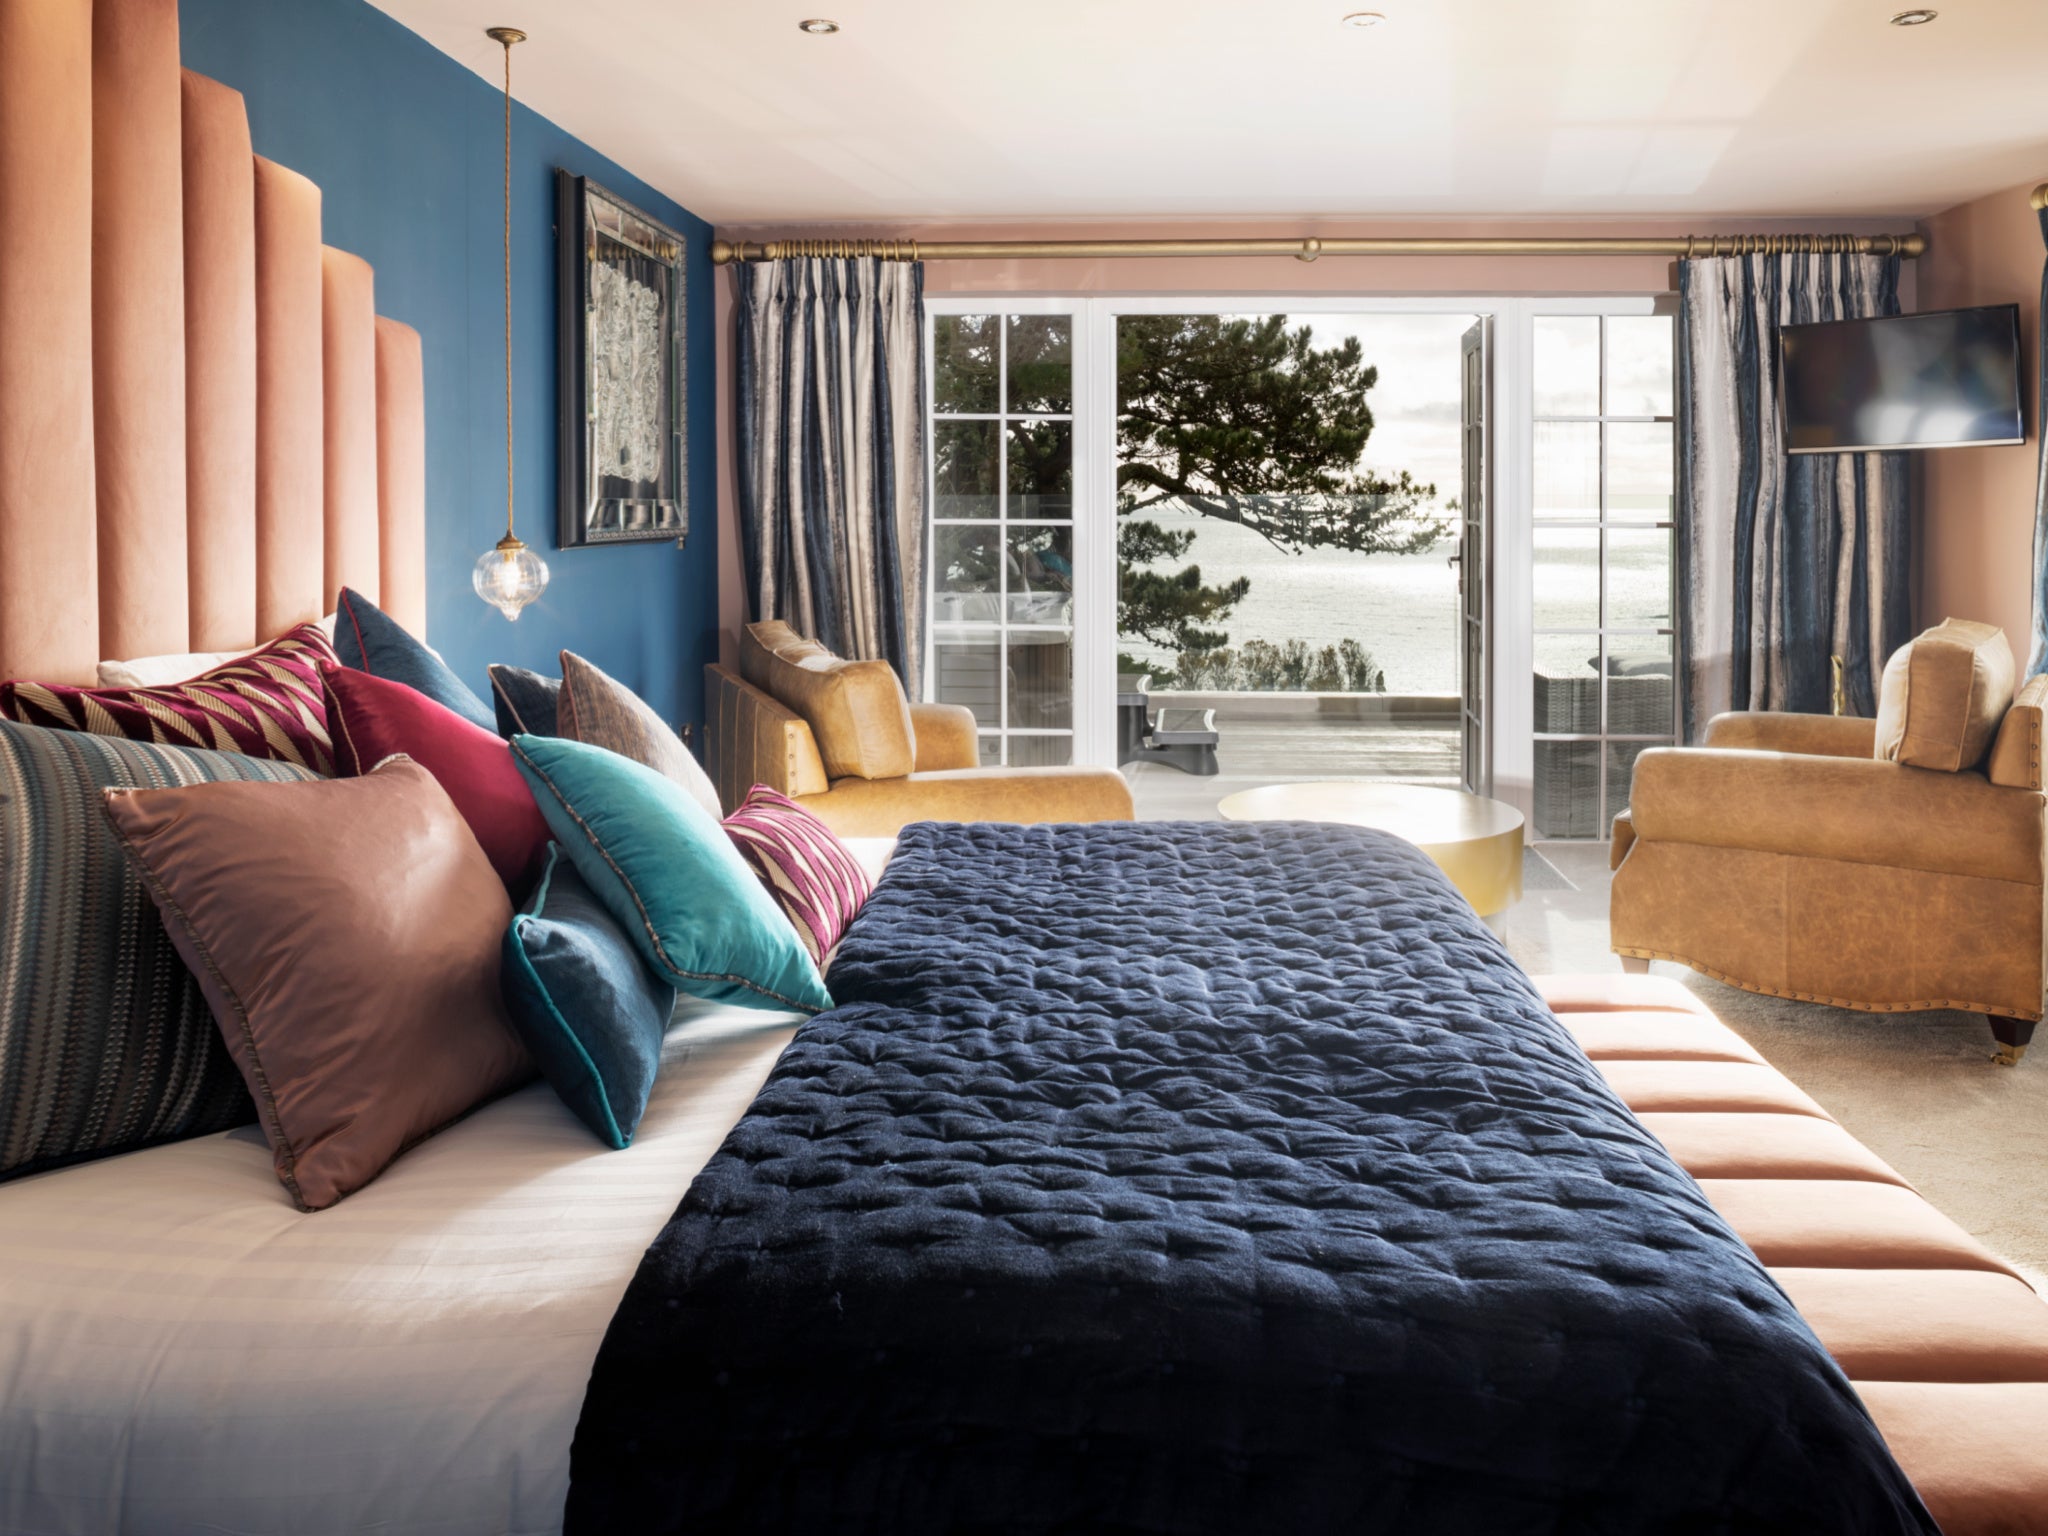 All of the 20 dog-friendly rooms at Talland Bay have private terraces